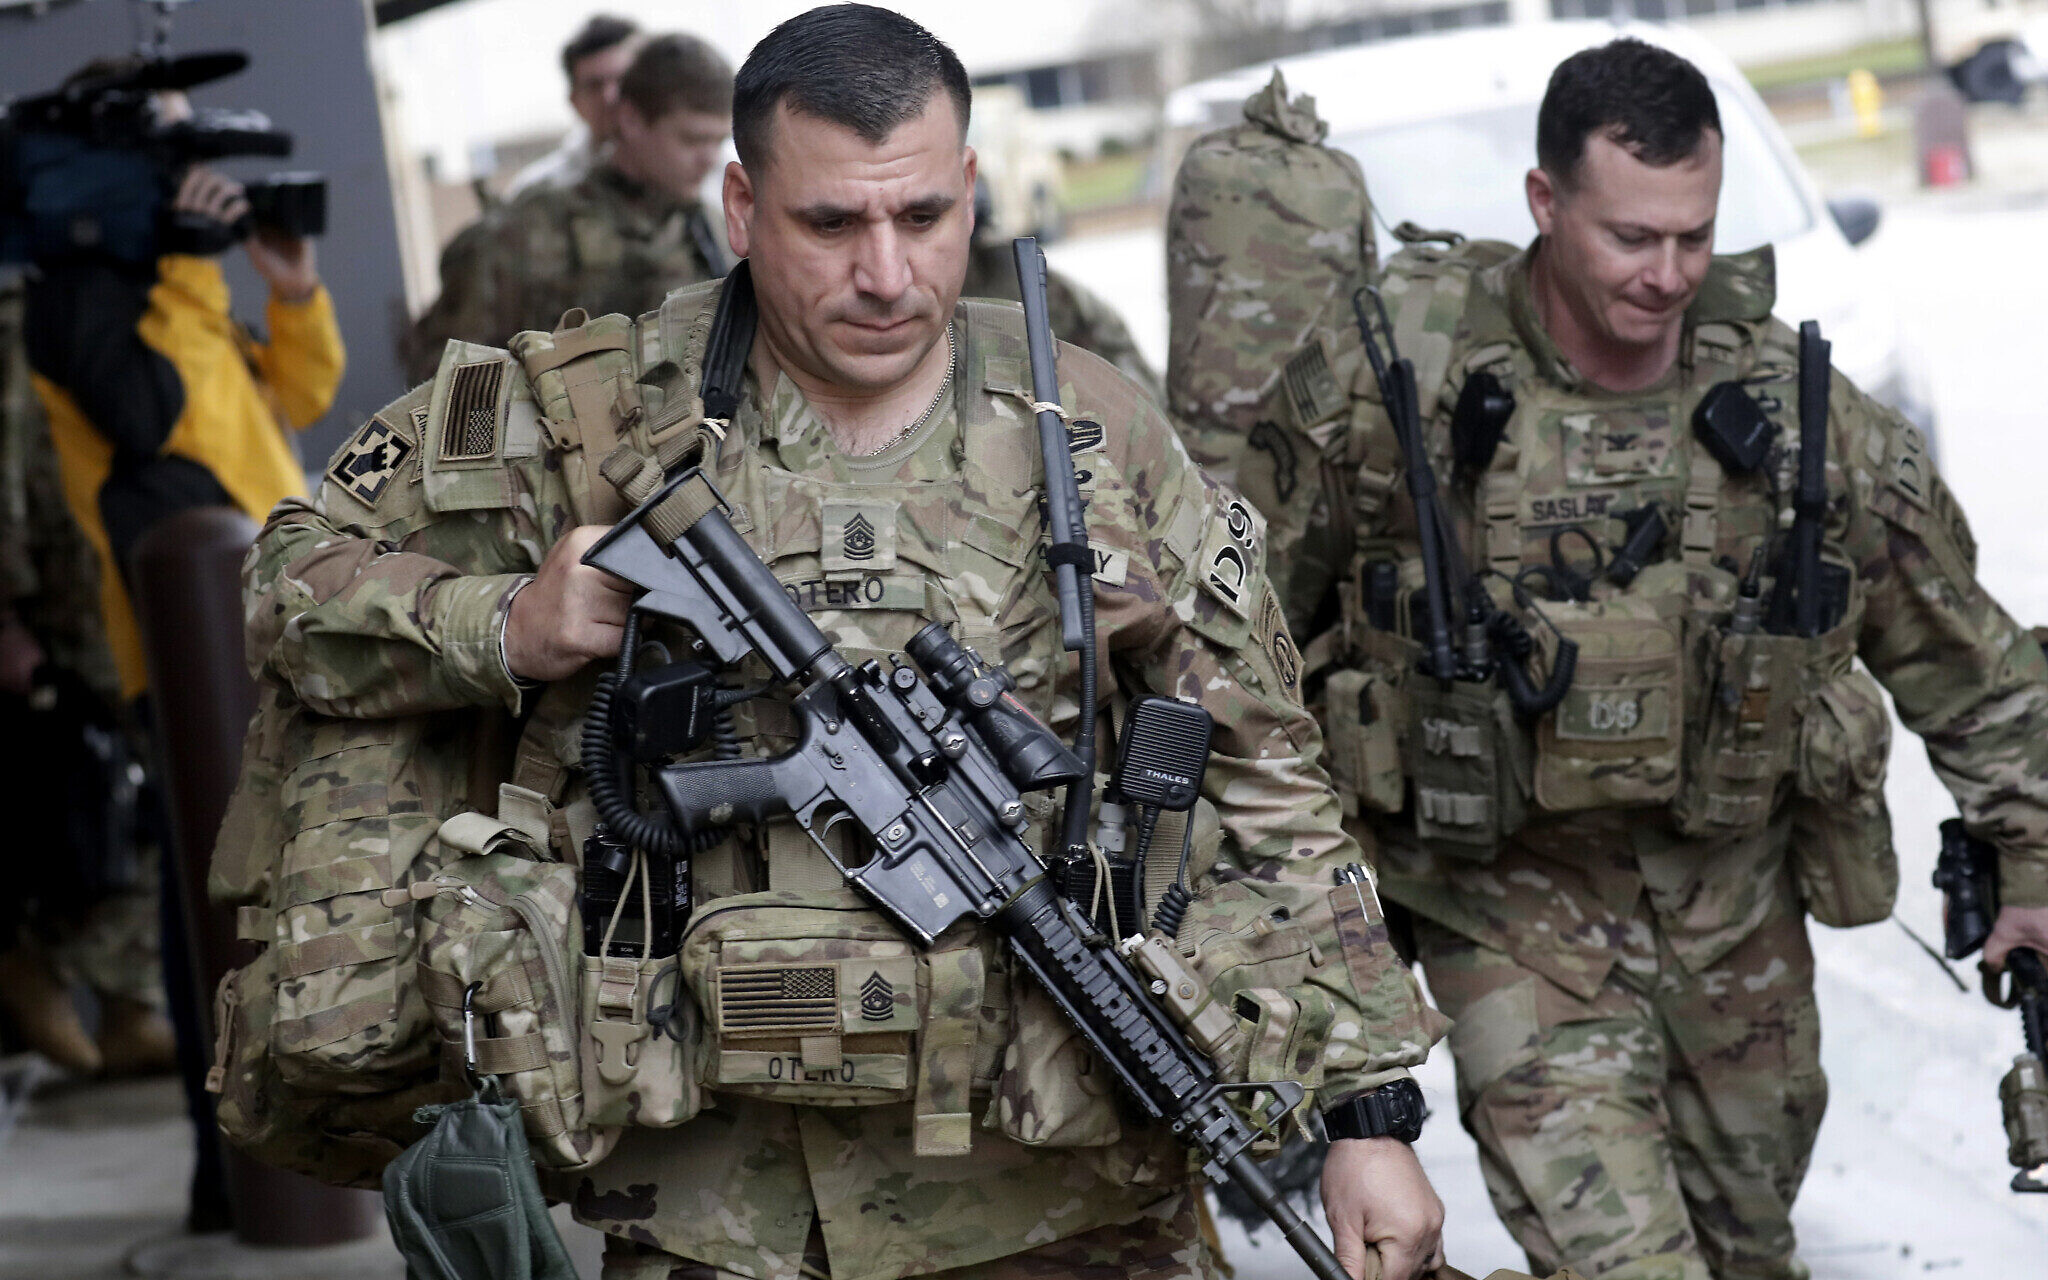 Iraq's parliament calls for expulsion of US troops | The Times of Israel